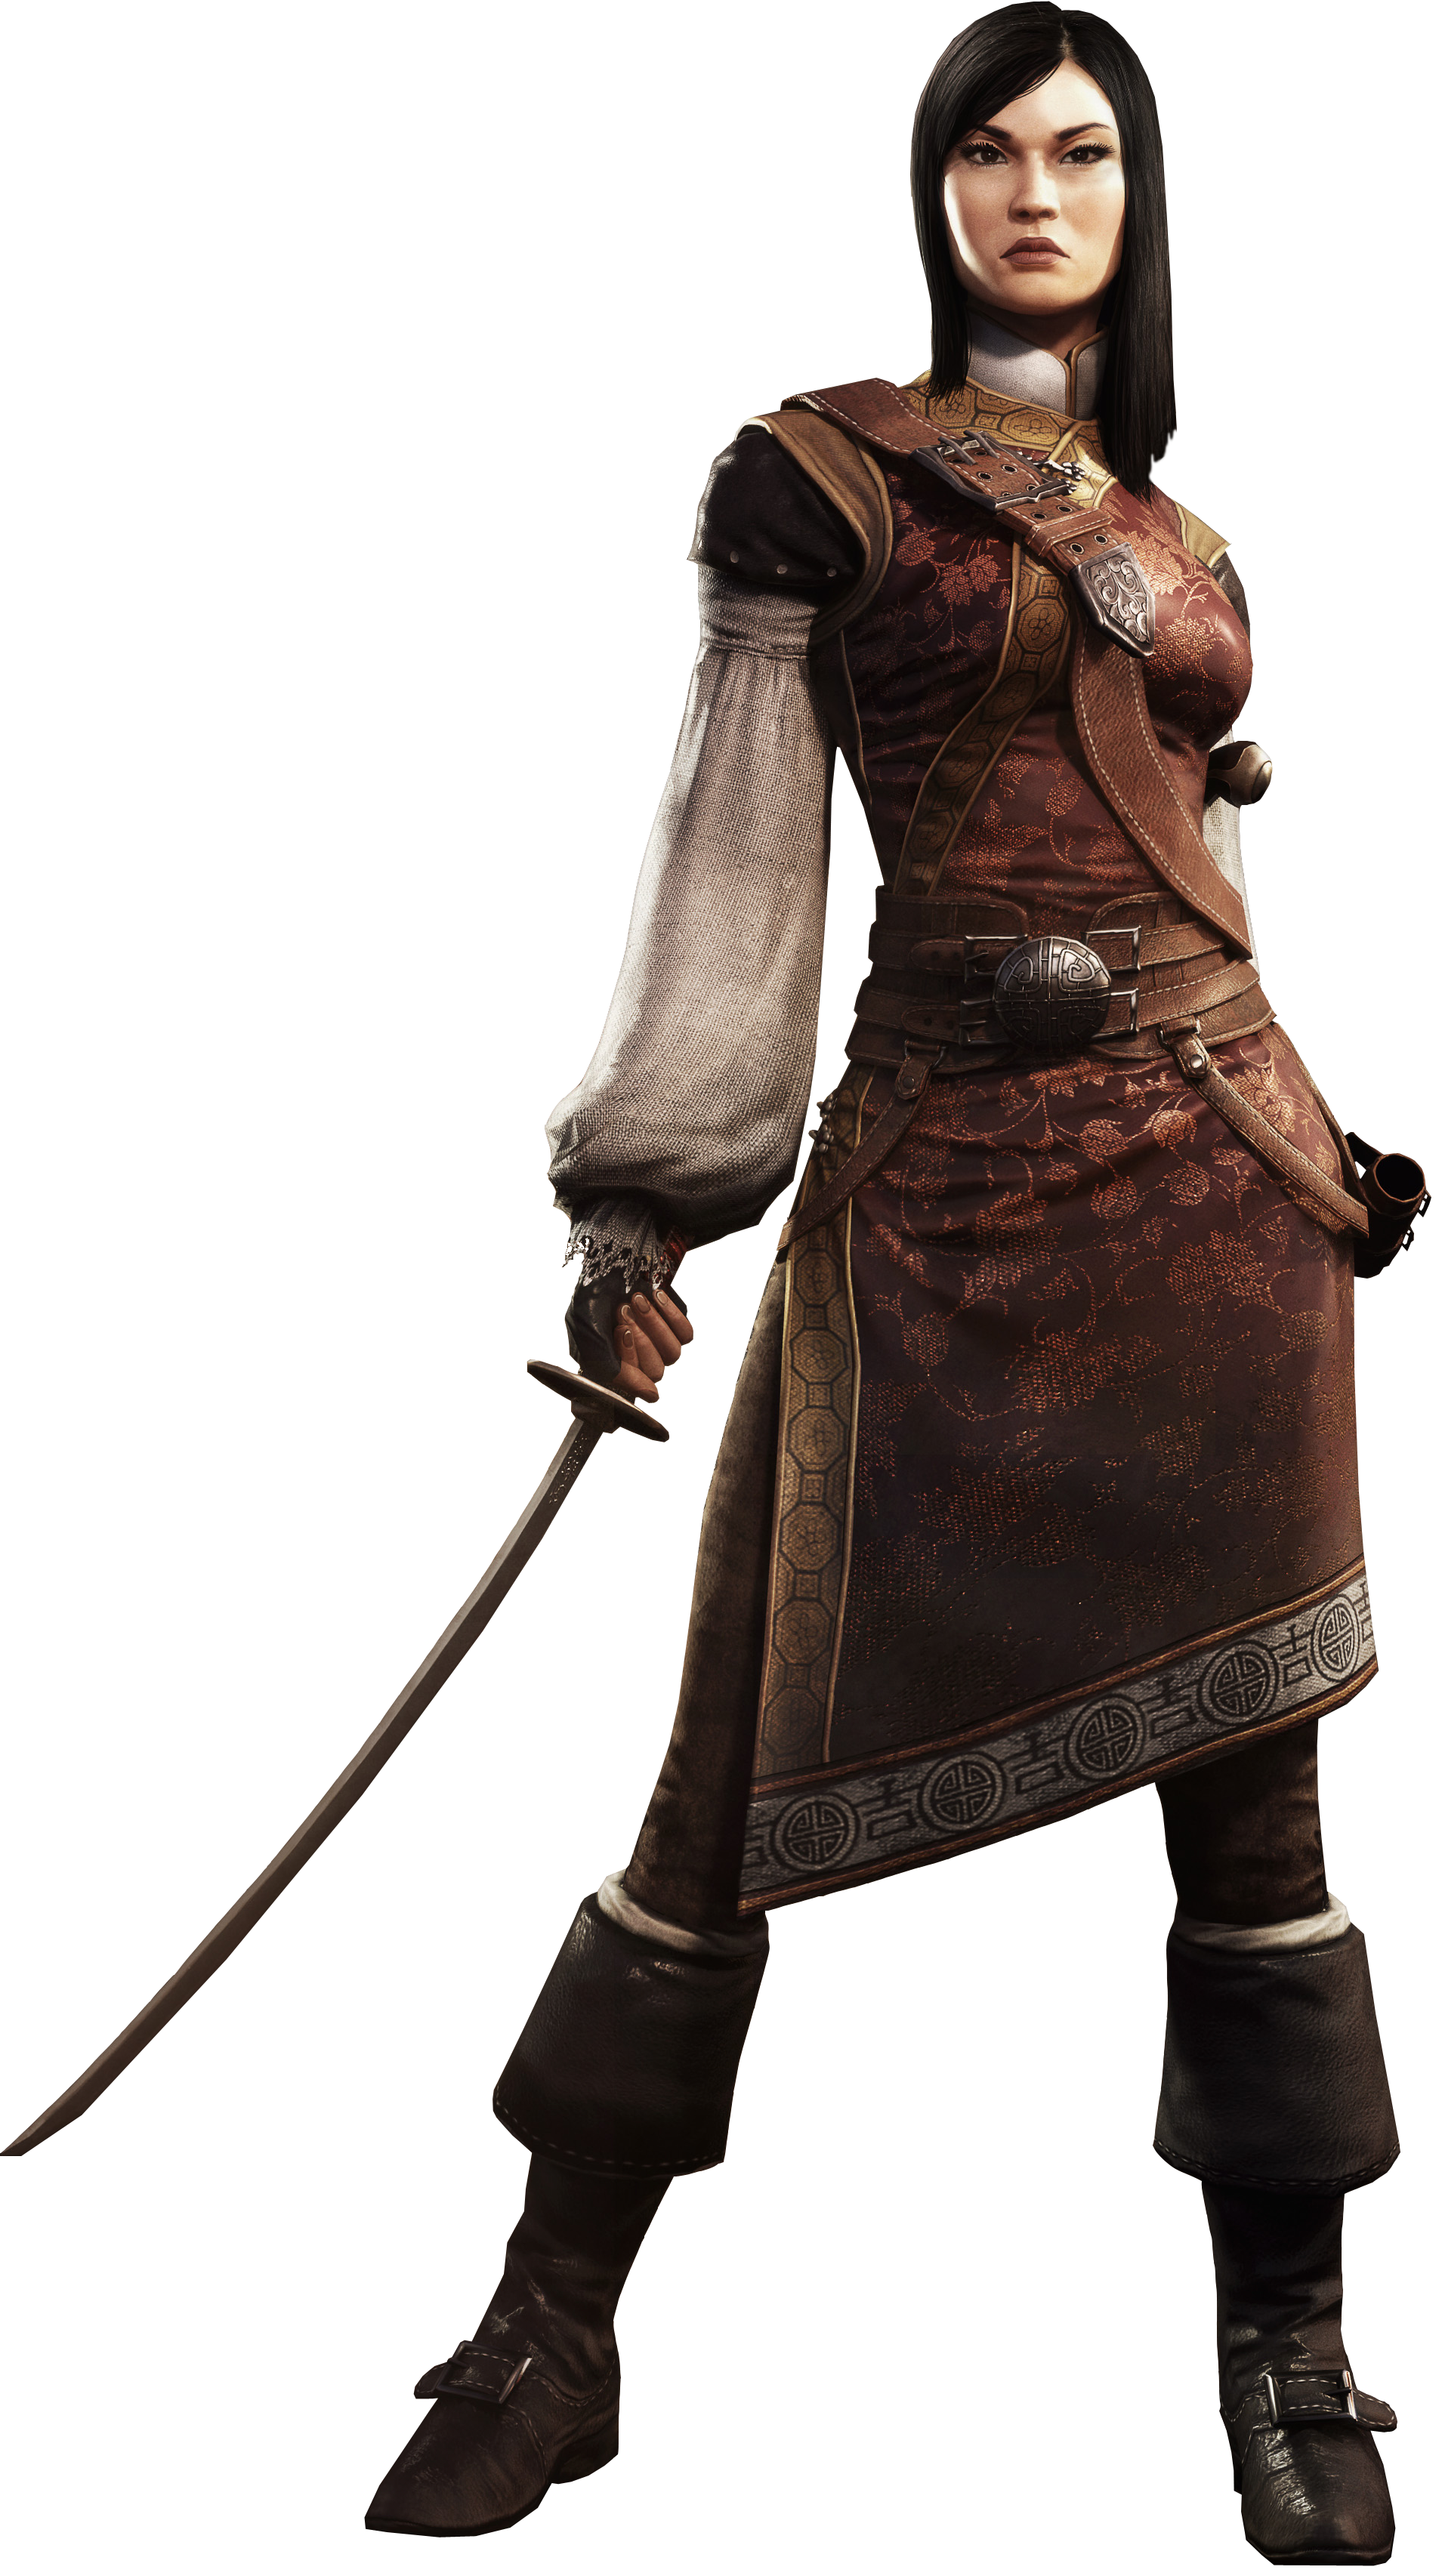 Jing Lang | Assassin's Creed Wiki | FANDOM powered by Wikia